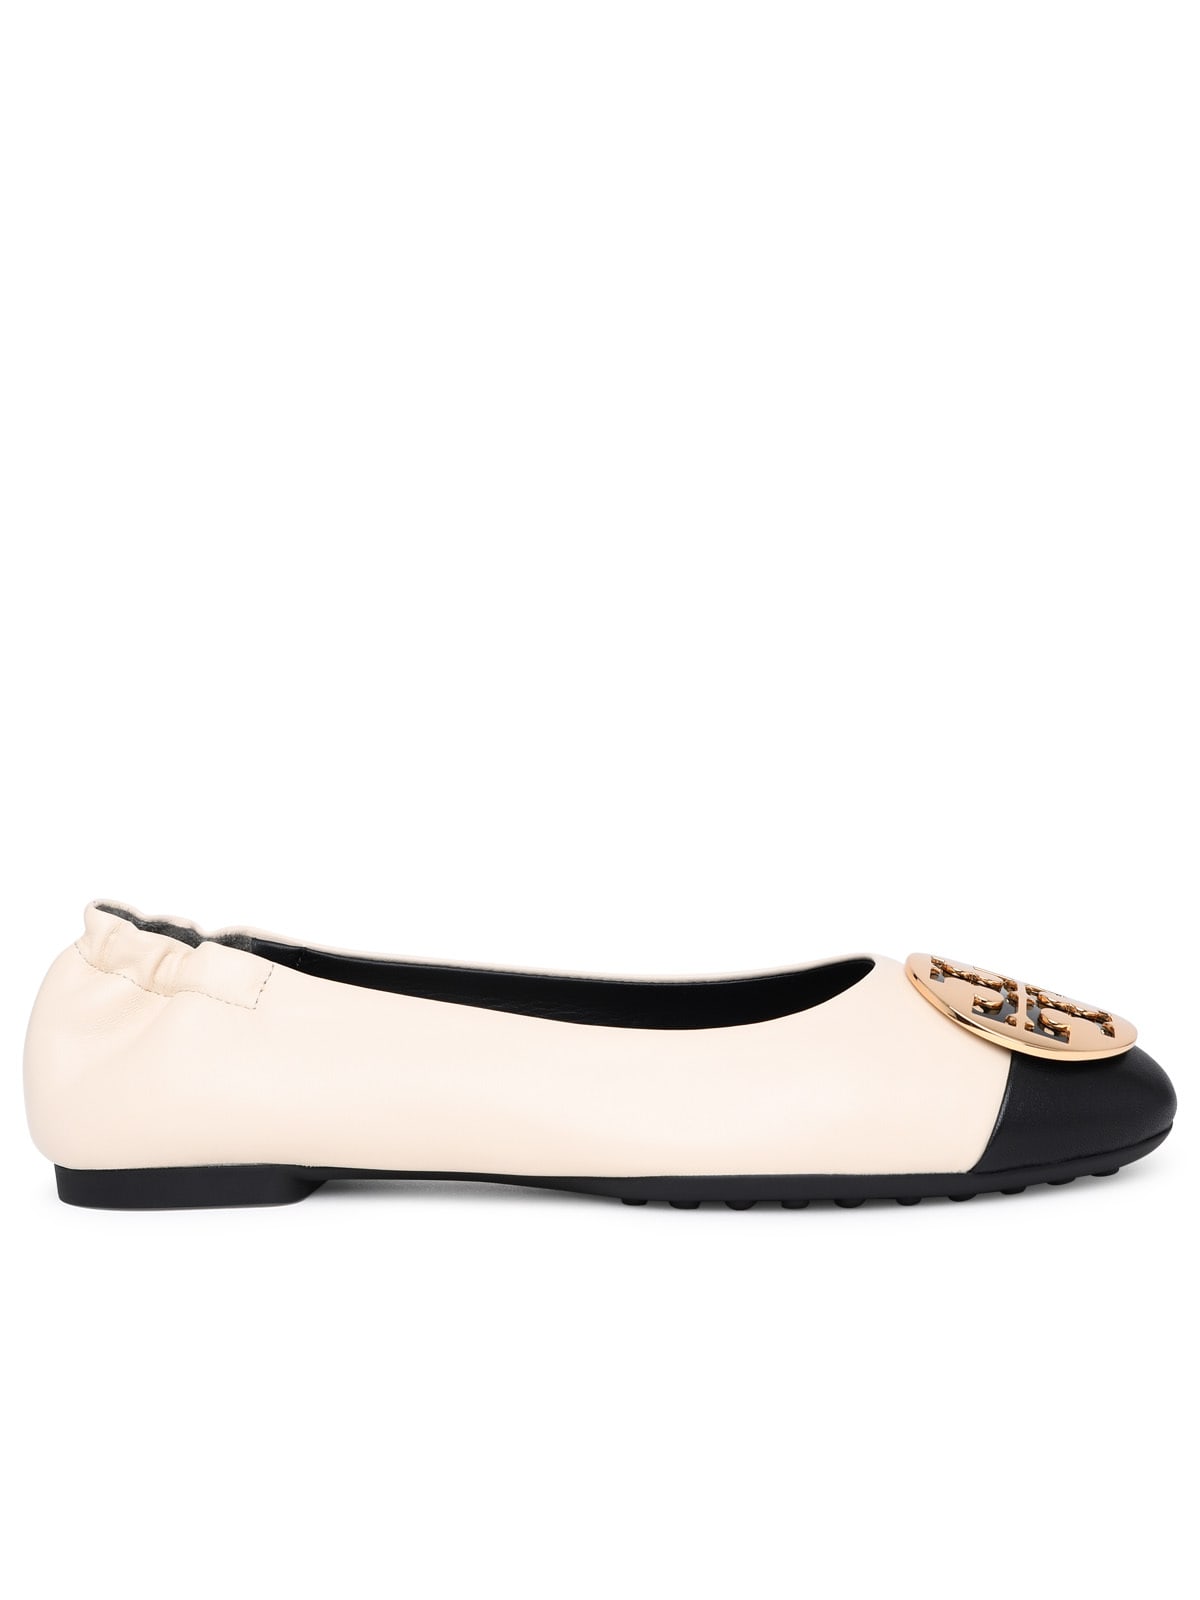 Tory Burch Claire Two-color Leather Ballet Flats Flat Shoes In Cream